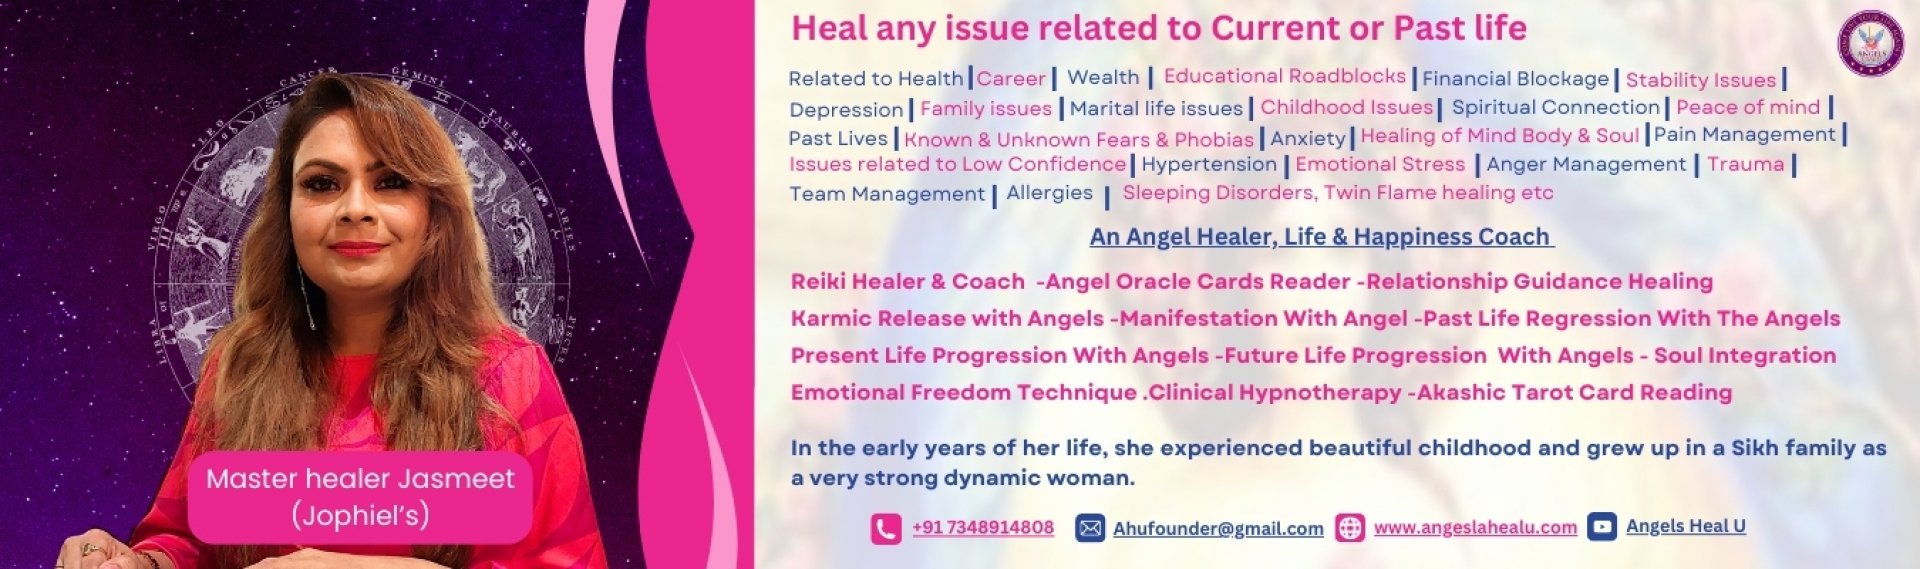 Heal any issue Related to Current or Past Life